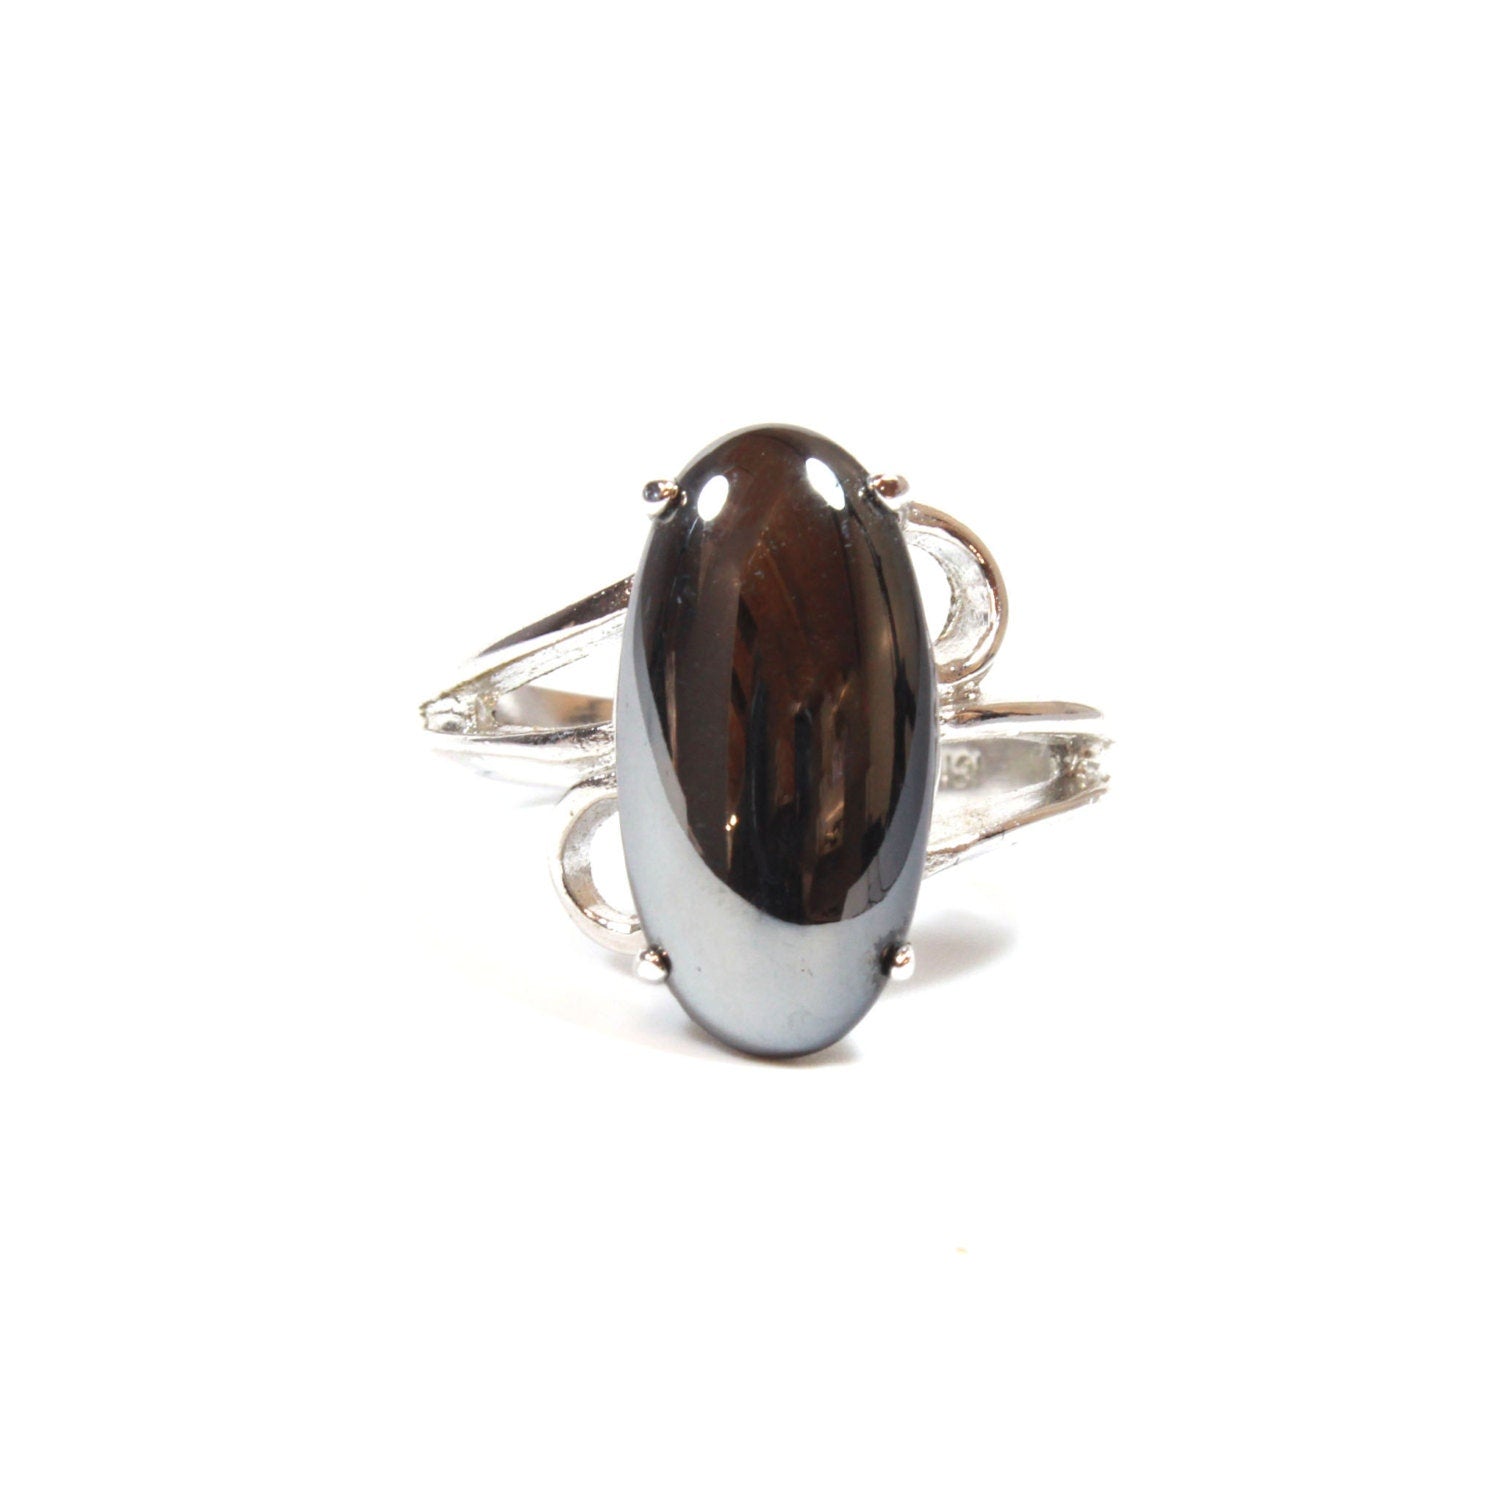 Vintage Ring 1970s Oval Cut Glass Hematite 18k White Gold Silver Cocktail Ring #R1846 - Limited Stock - Never Worn